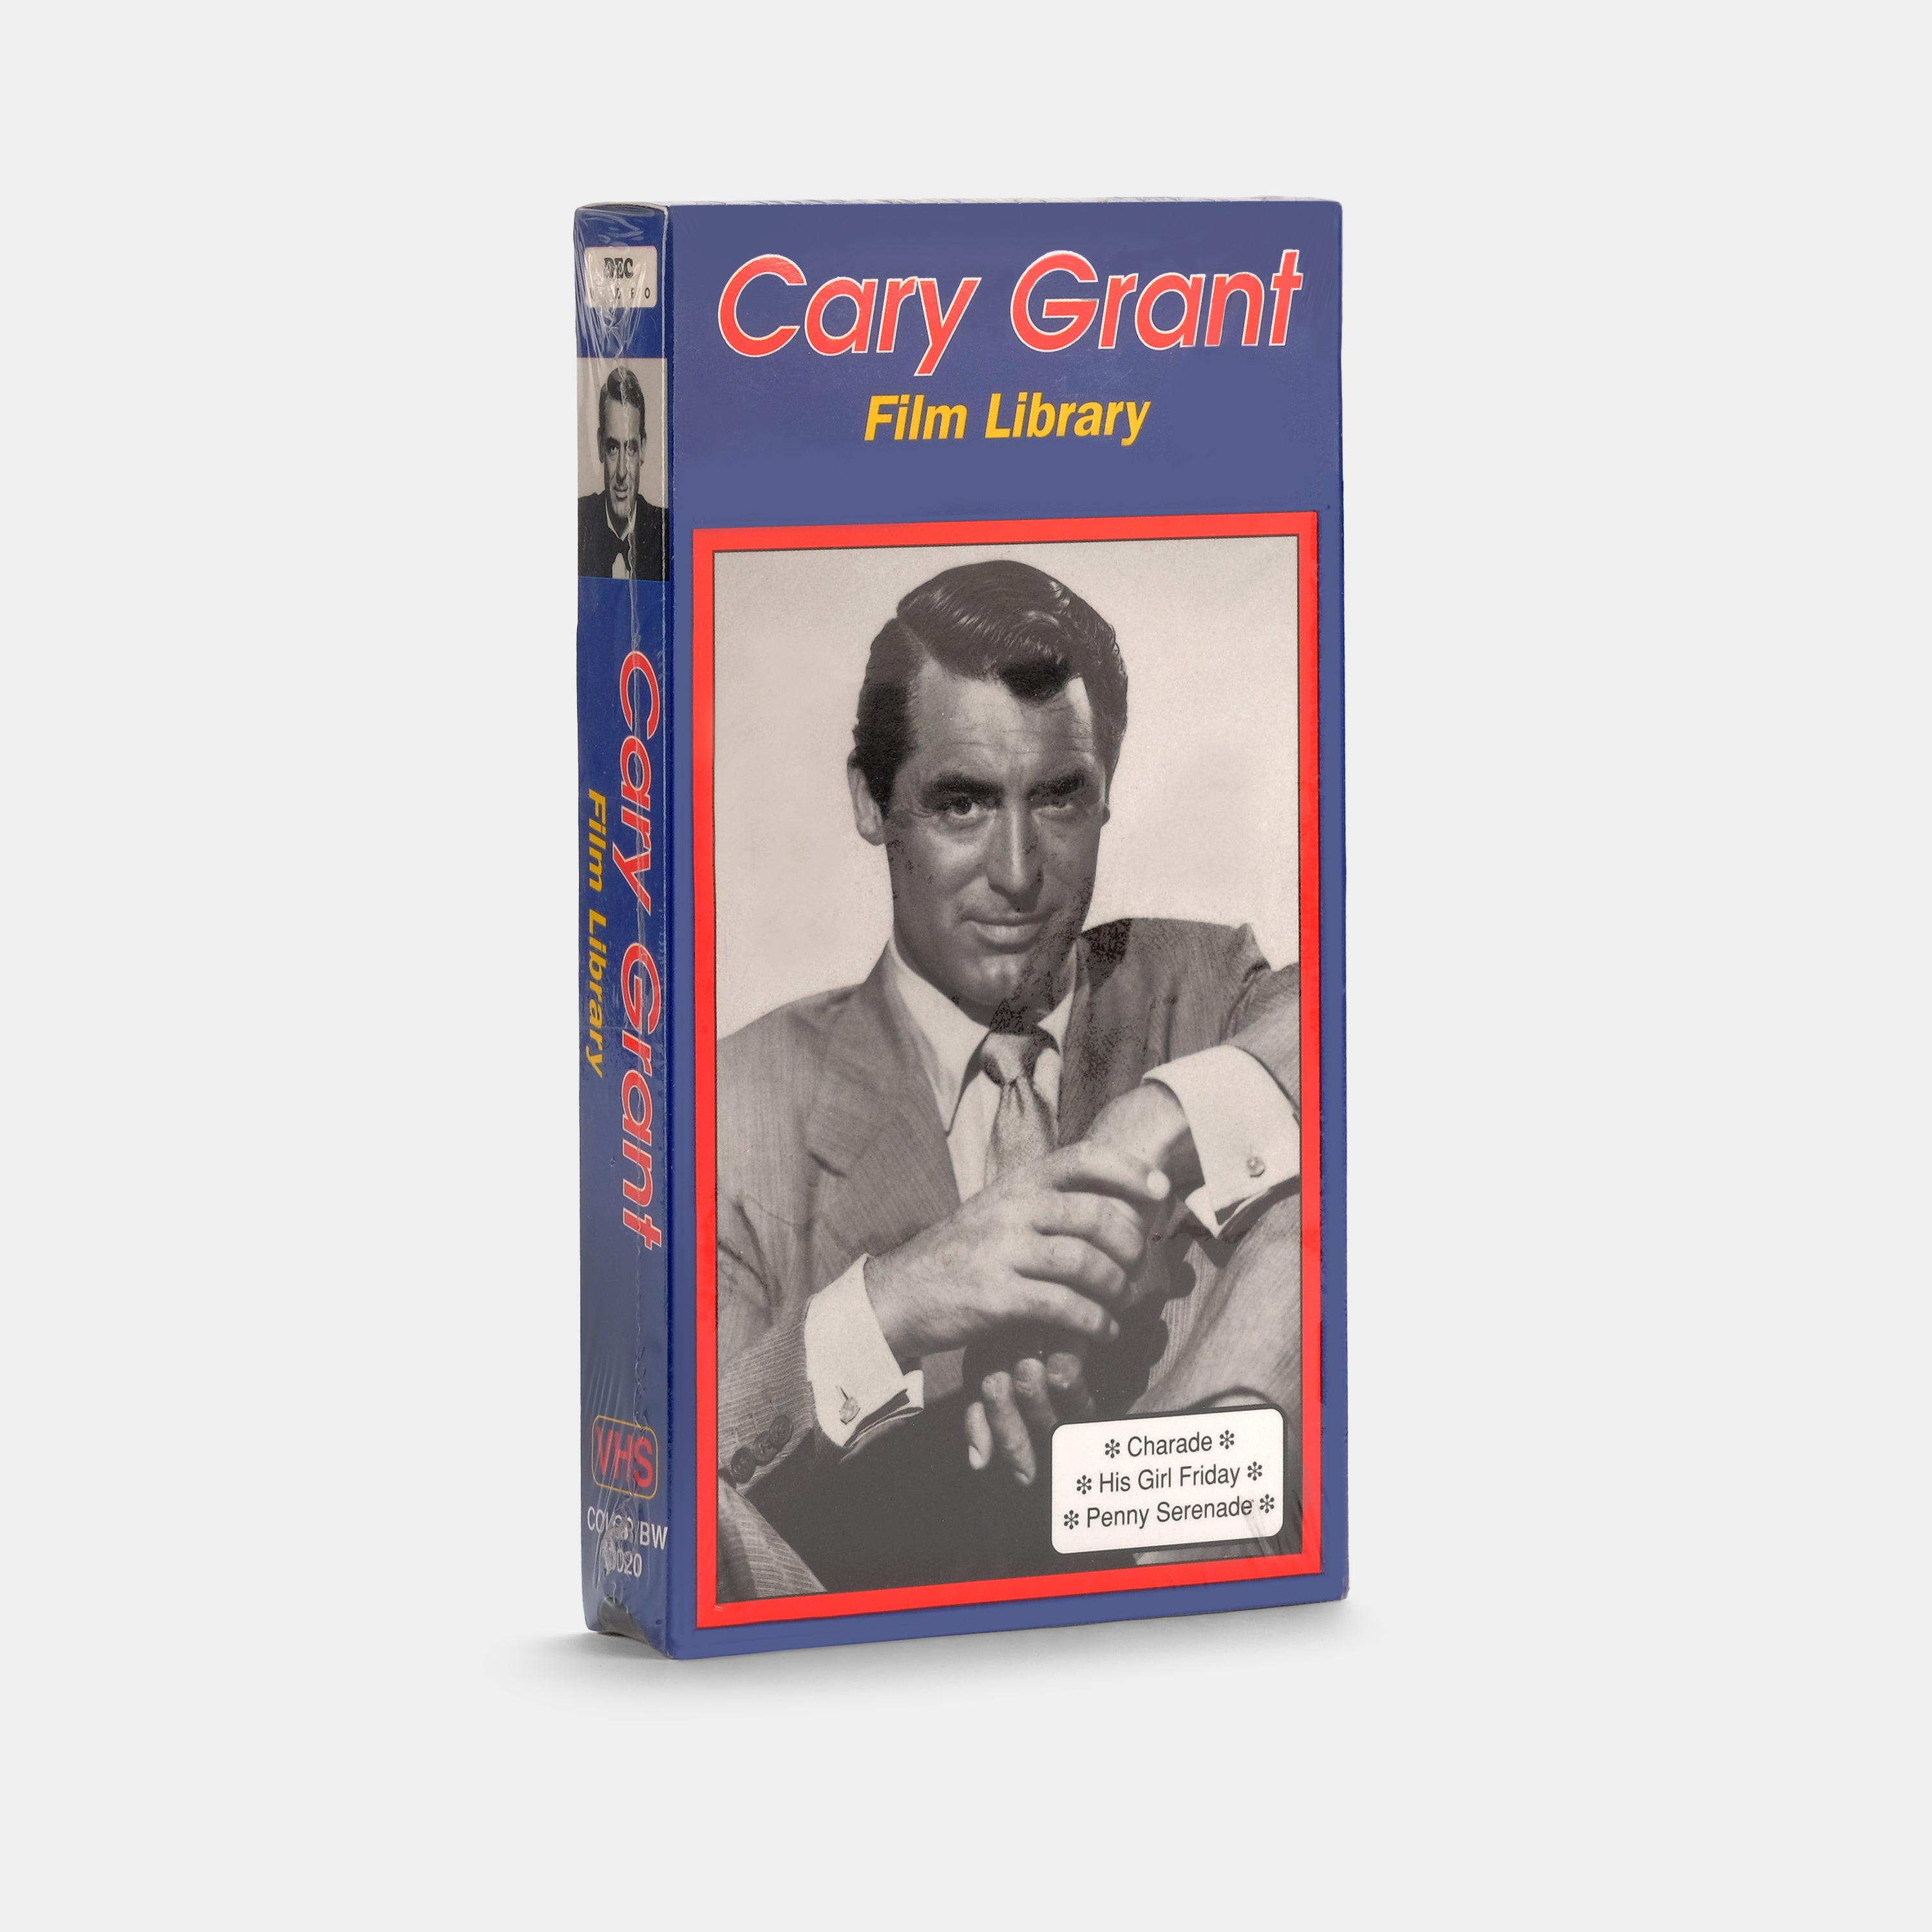 Cary Grant: Film Library (Sealed) VHS Tape